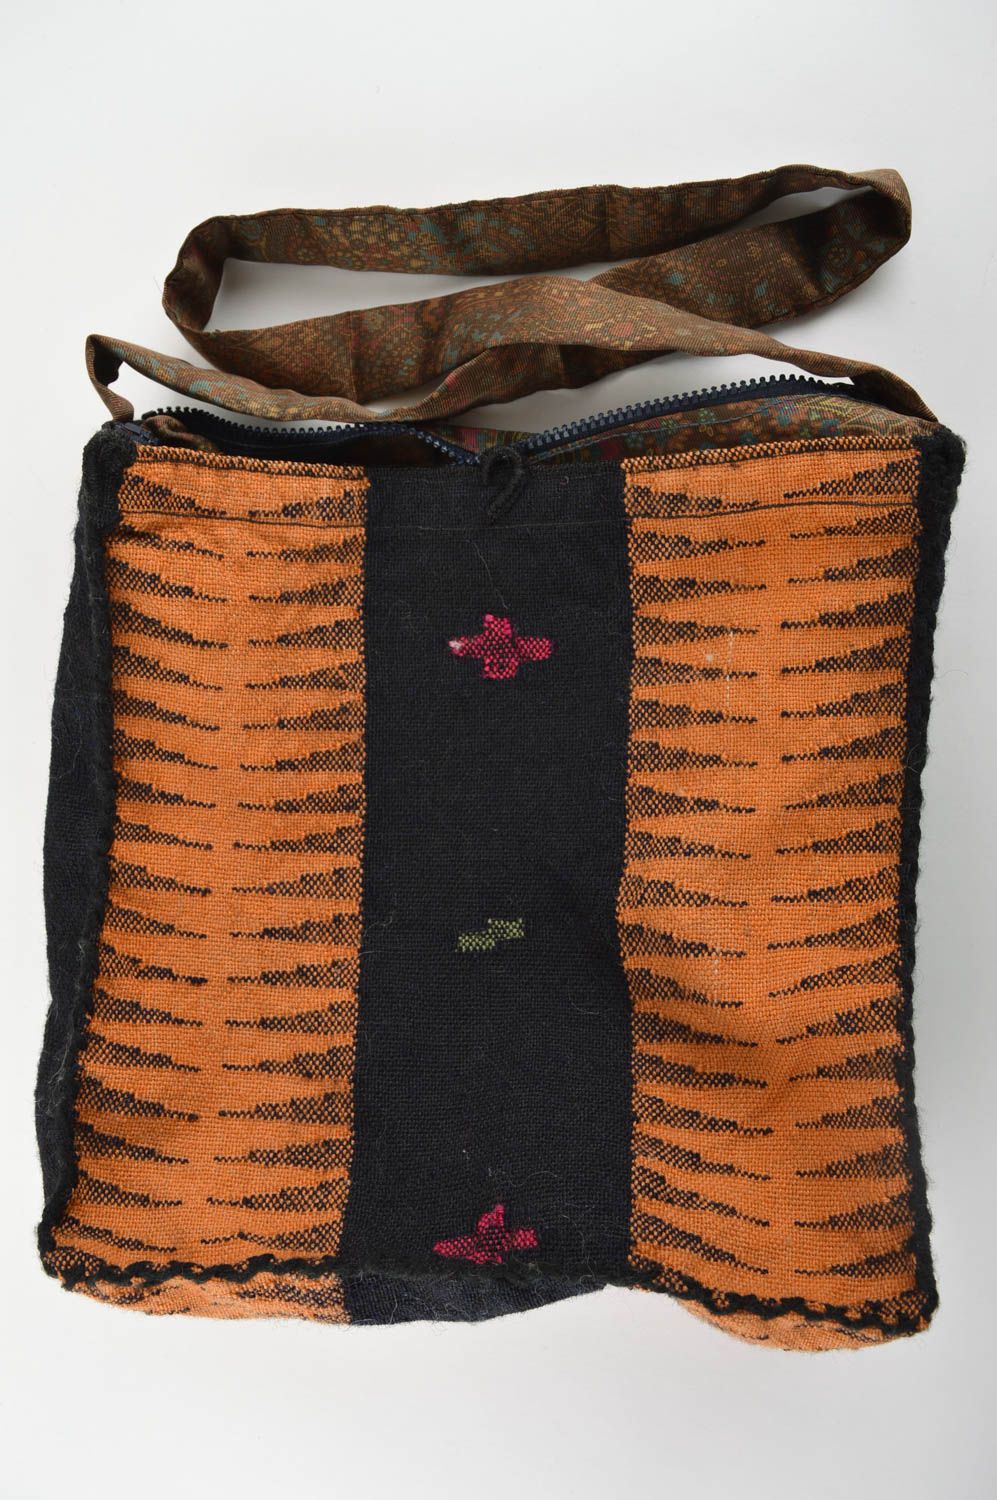 Felted shoulder bag stylish accessories woolen bags handmade felted purse photo 3